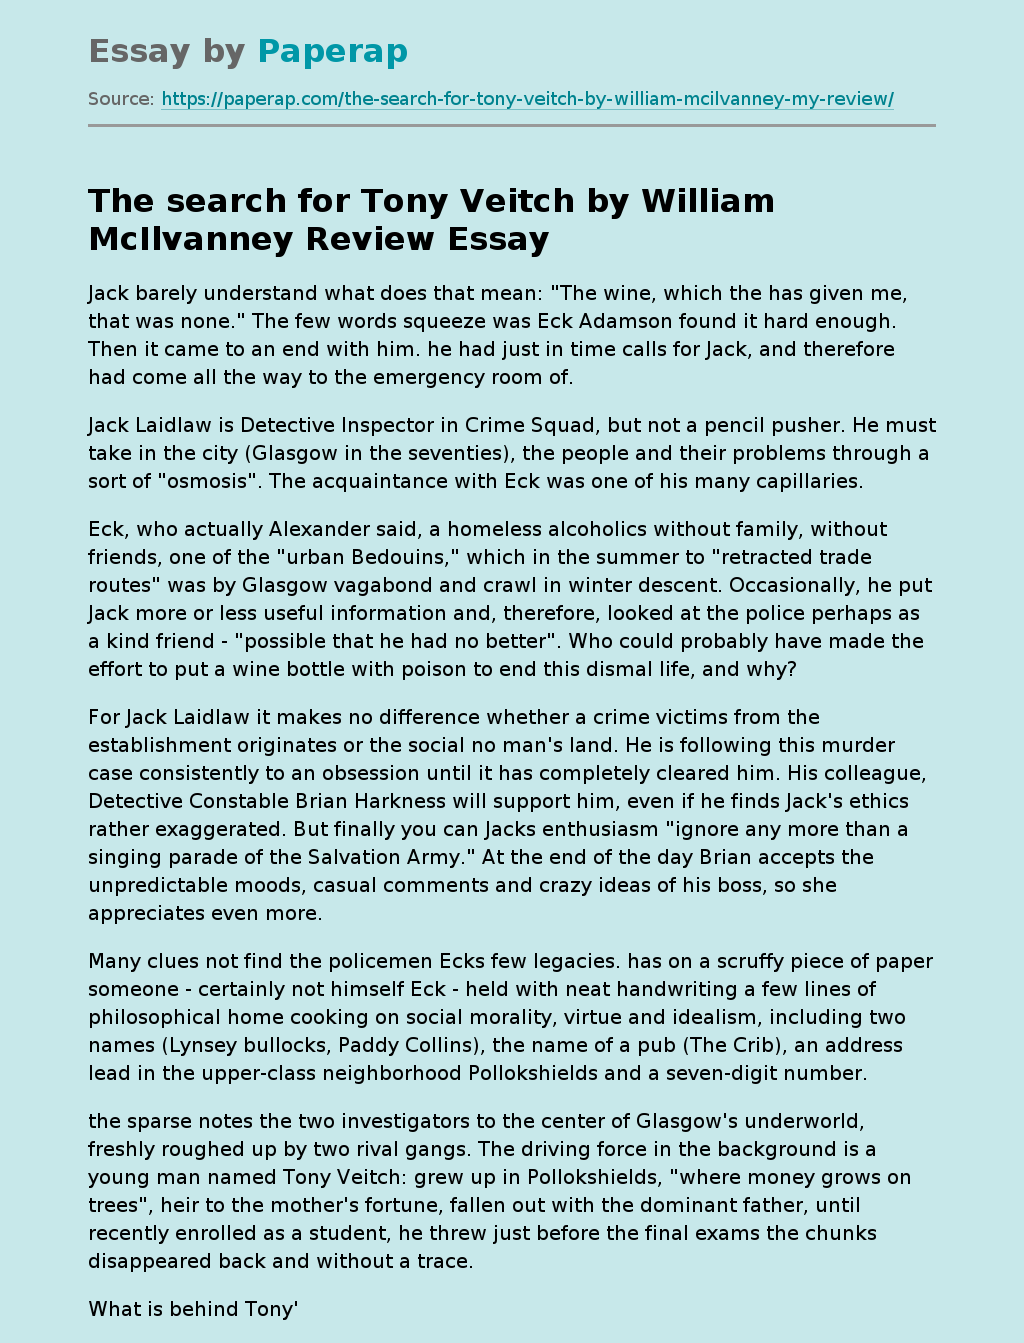 The search for Tony Veitch by William McIlvanney Review